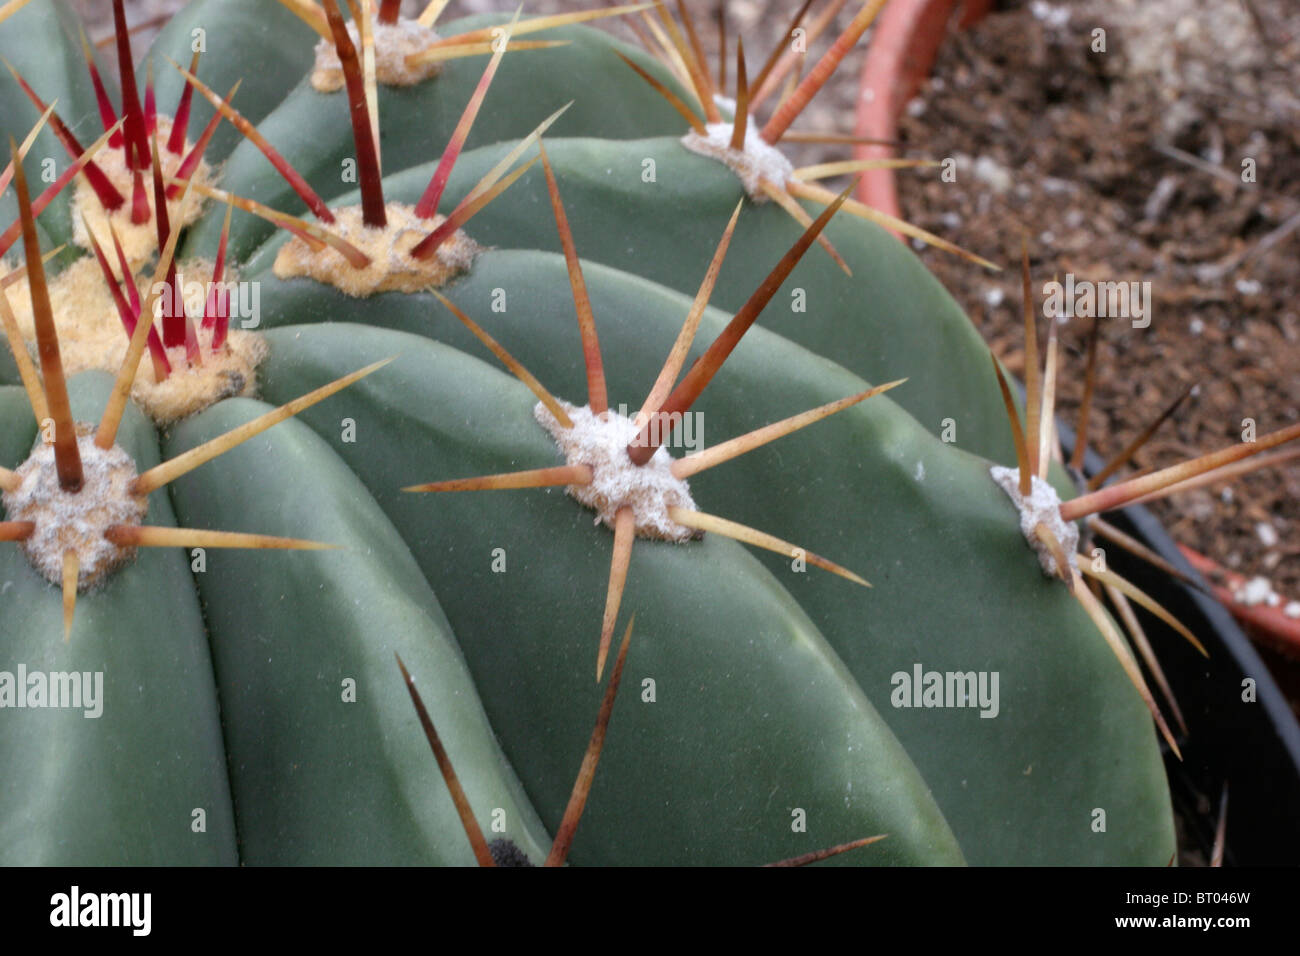 Cactus (Ferocactus pottsii) showing radial and central spines and ribs. Stock Photo